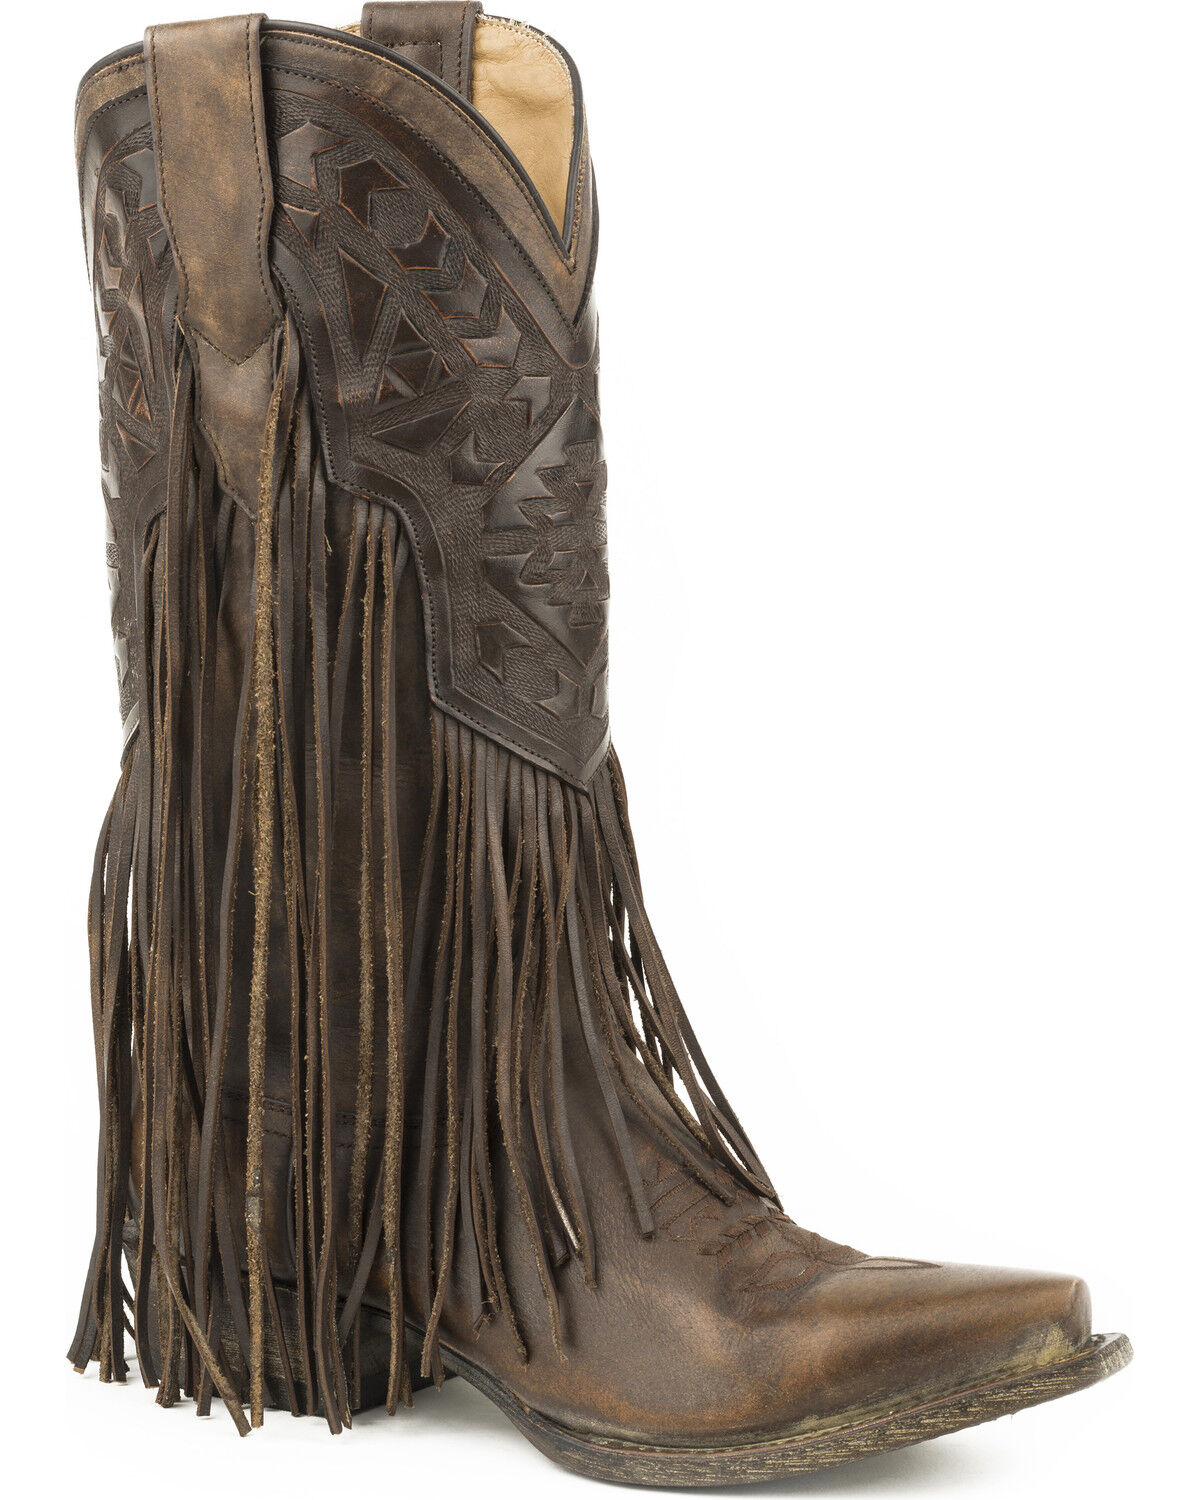 ladies boots with tassels